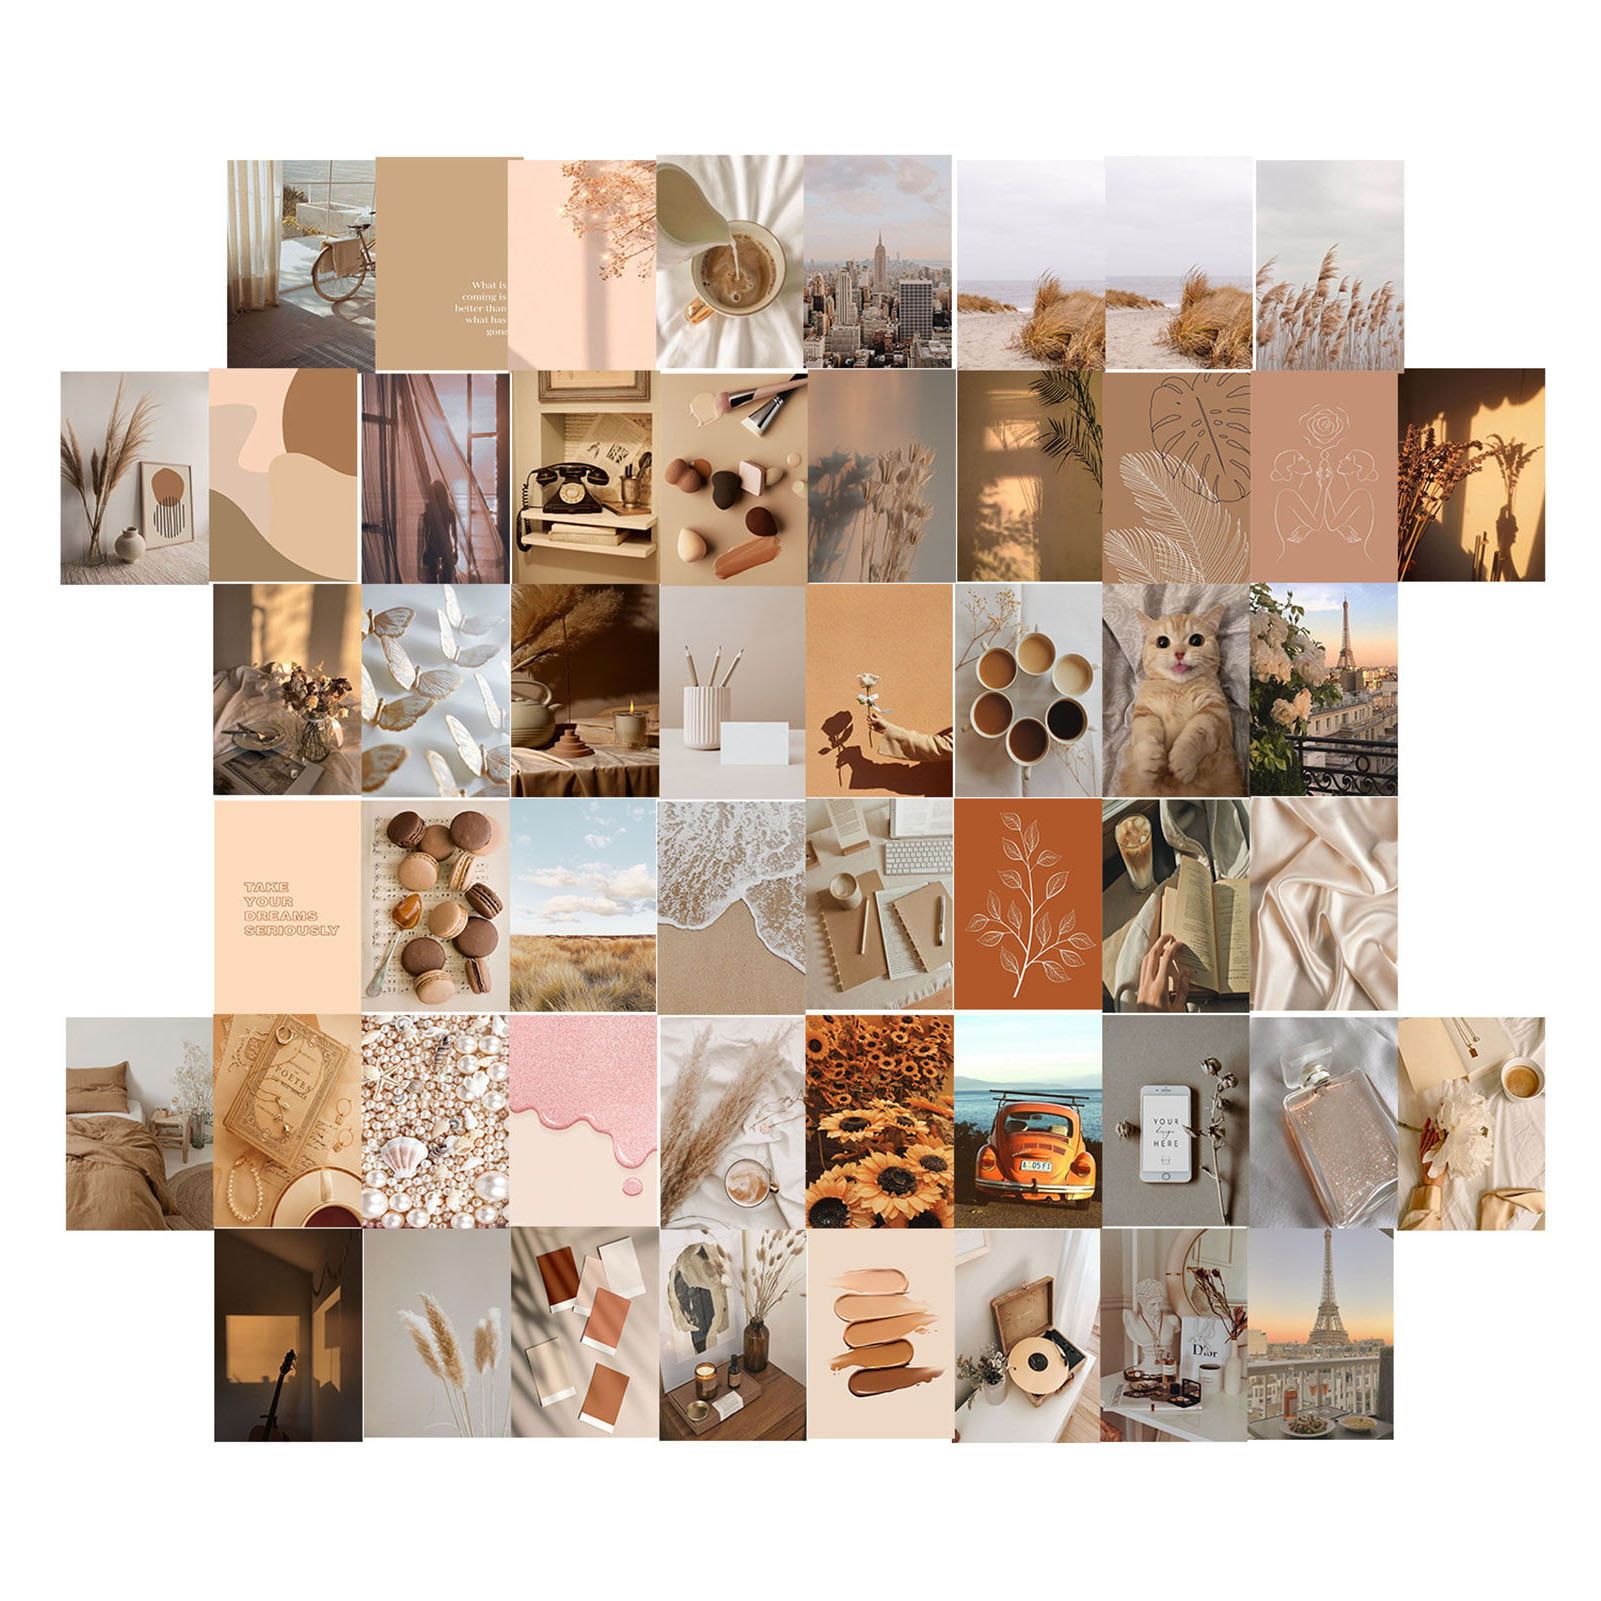 A collage of photos in warm neutral tones, including beige, brown, and pink. - Collage